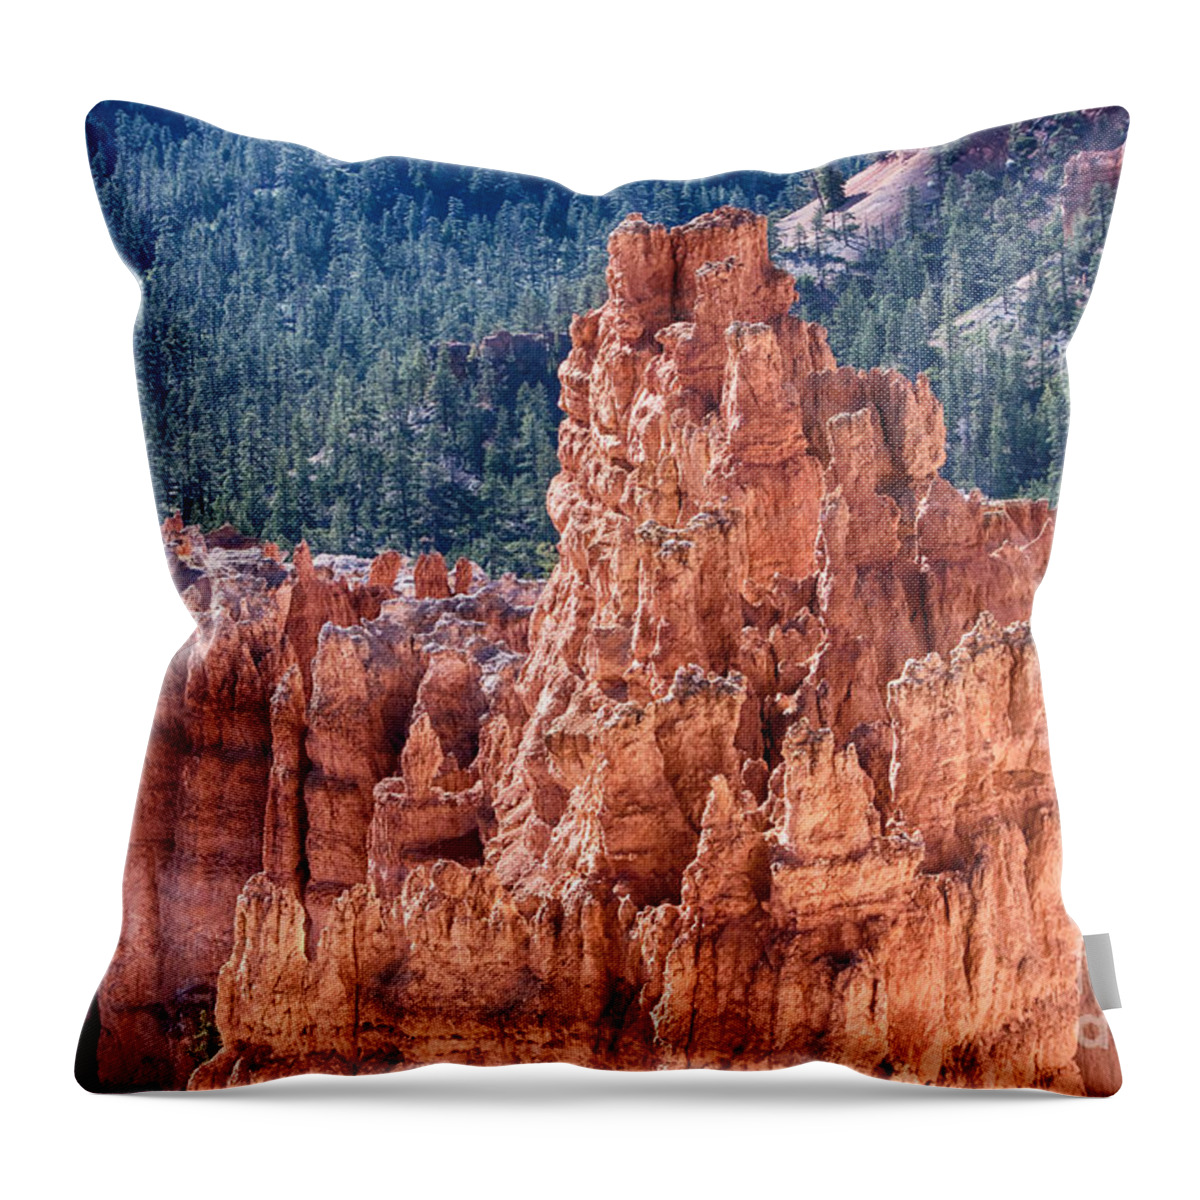 Bryce Canyon Throw Pillow featuring the photograph Bryce Canyon Utah Views 524 by James BO Insogna